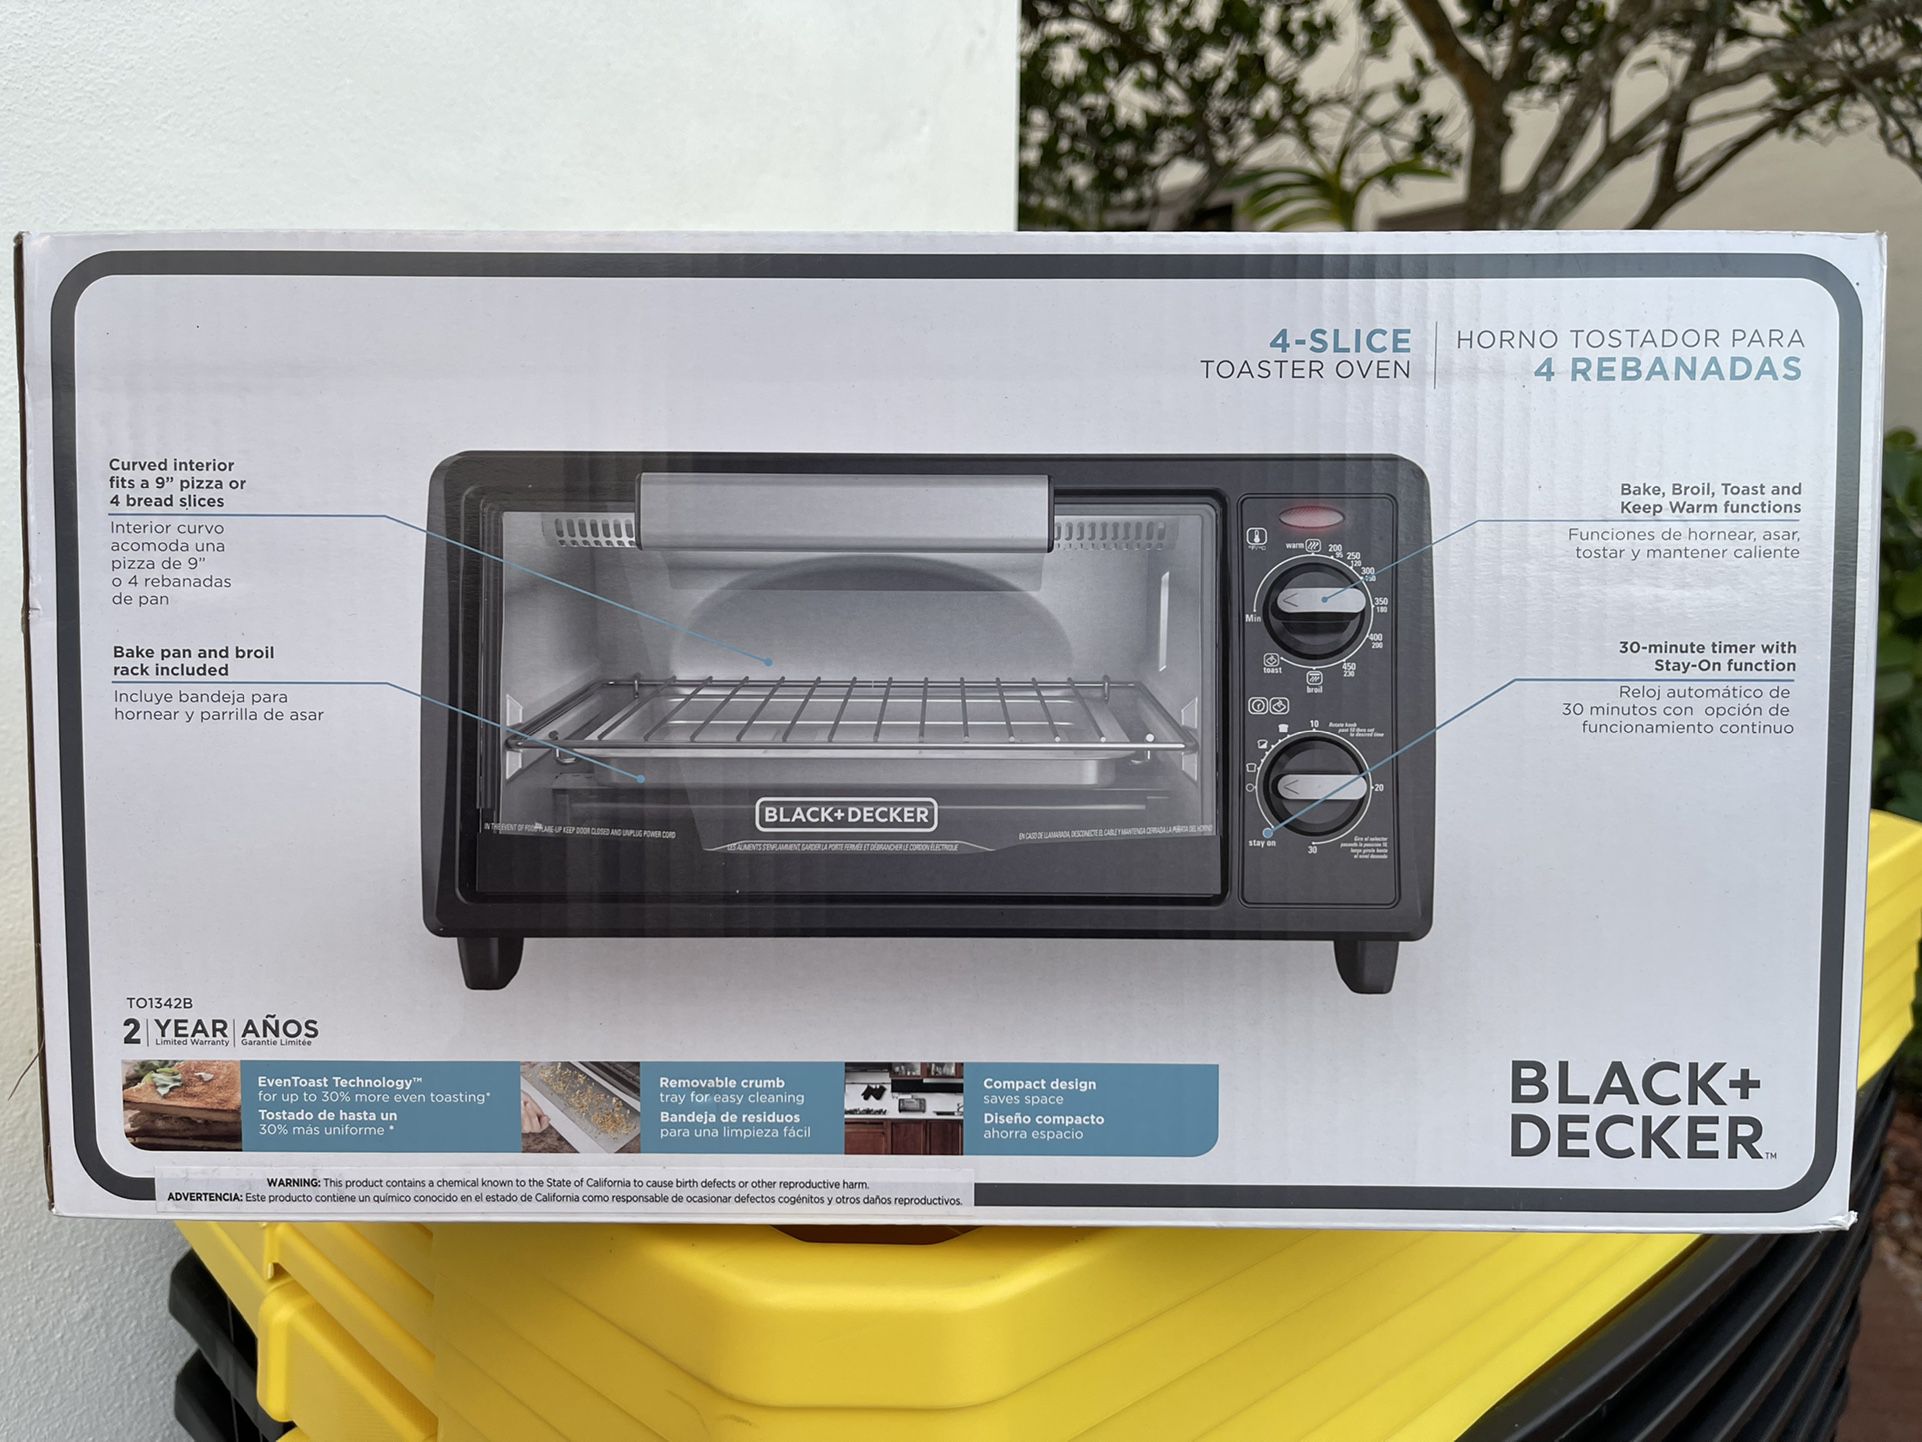 NEW - The BLACK+DECKER® 4-Slice Toaster Oven / TO1341B